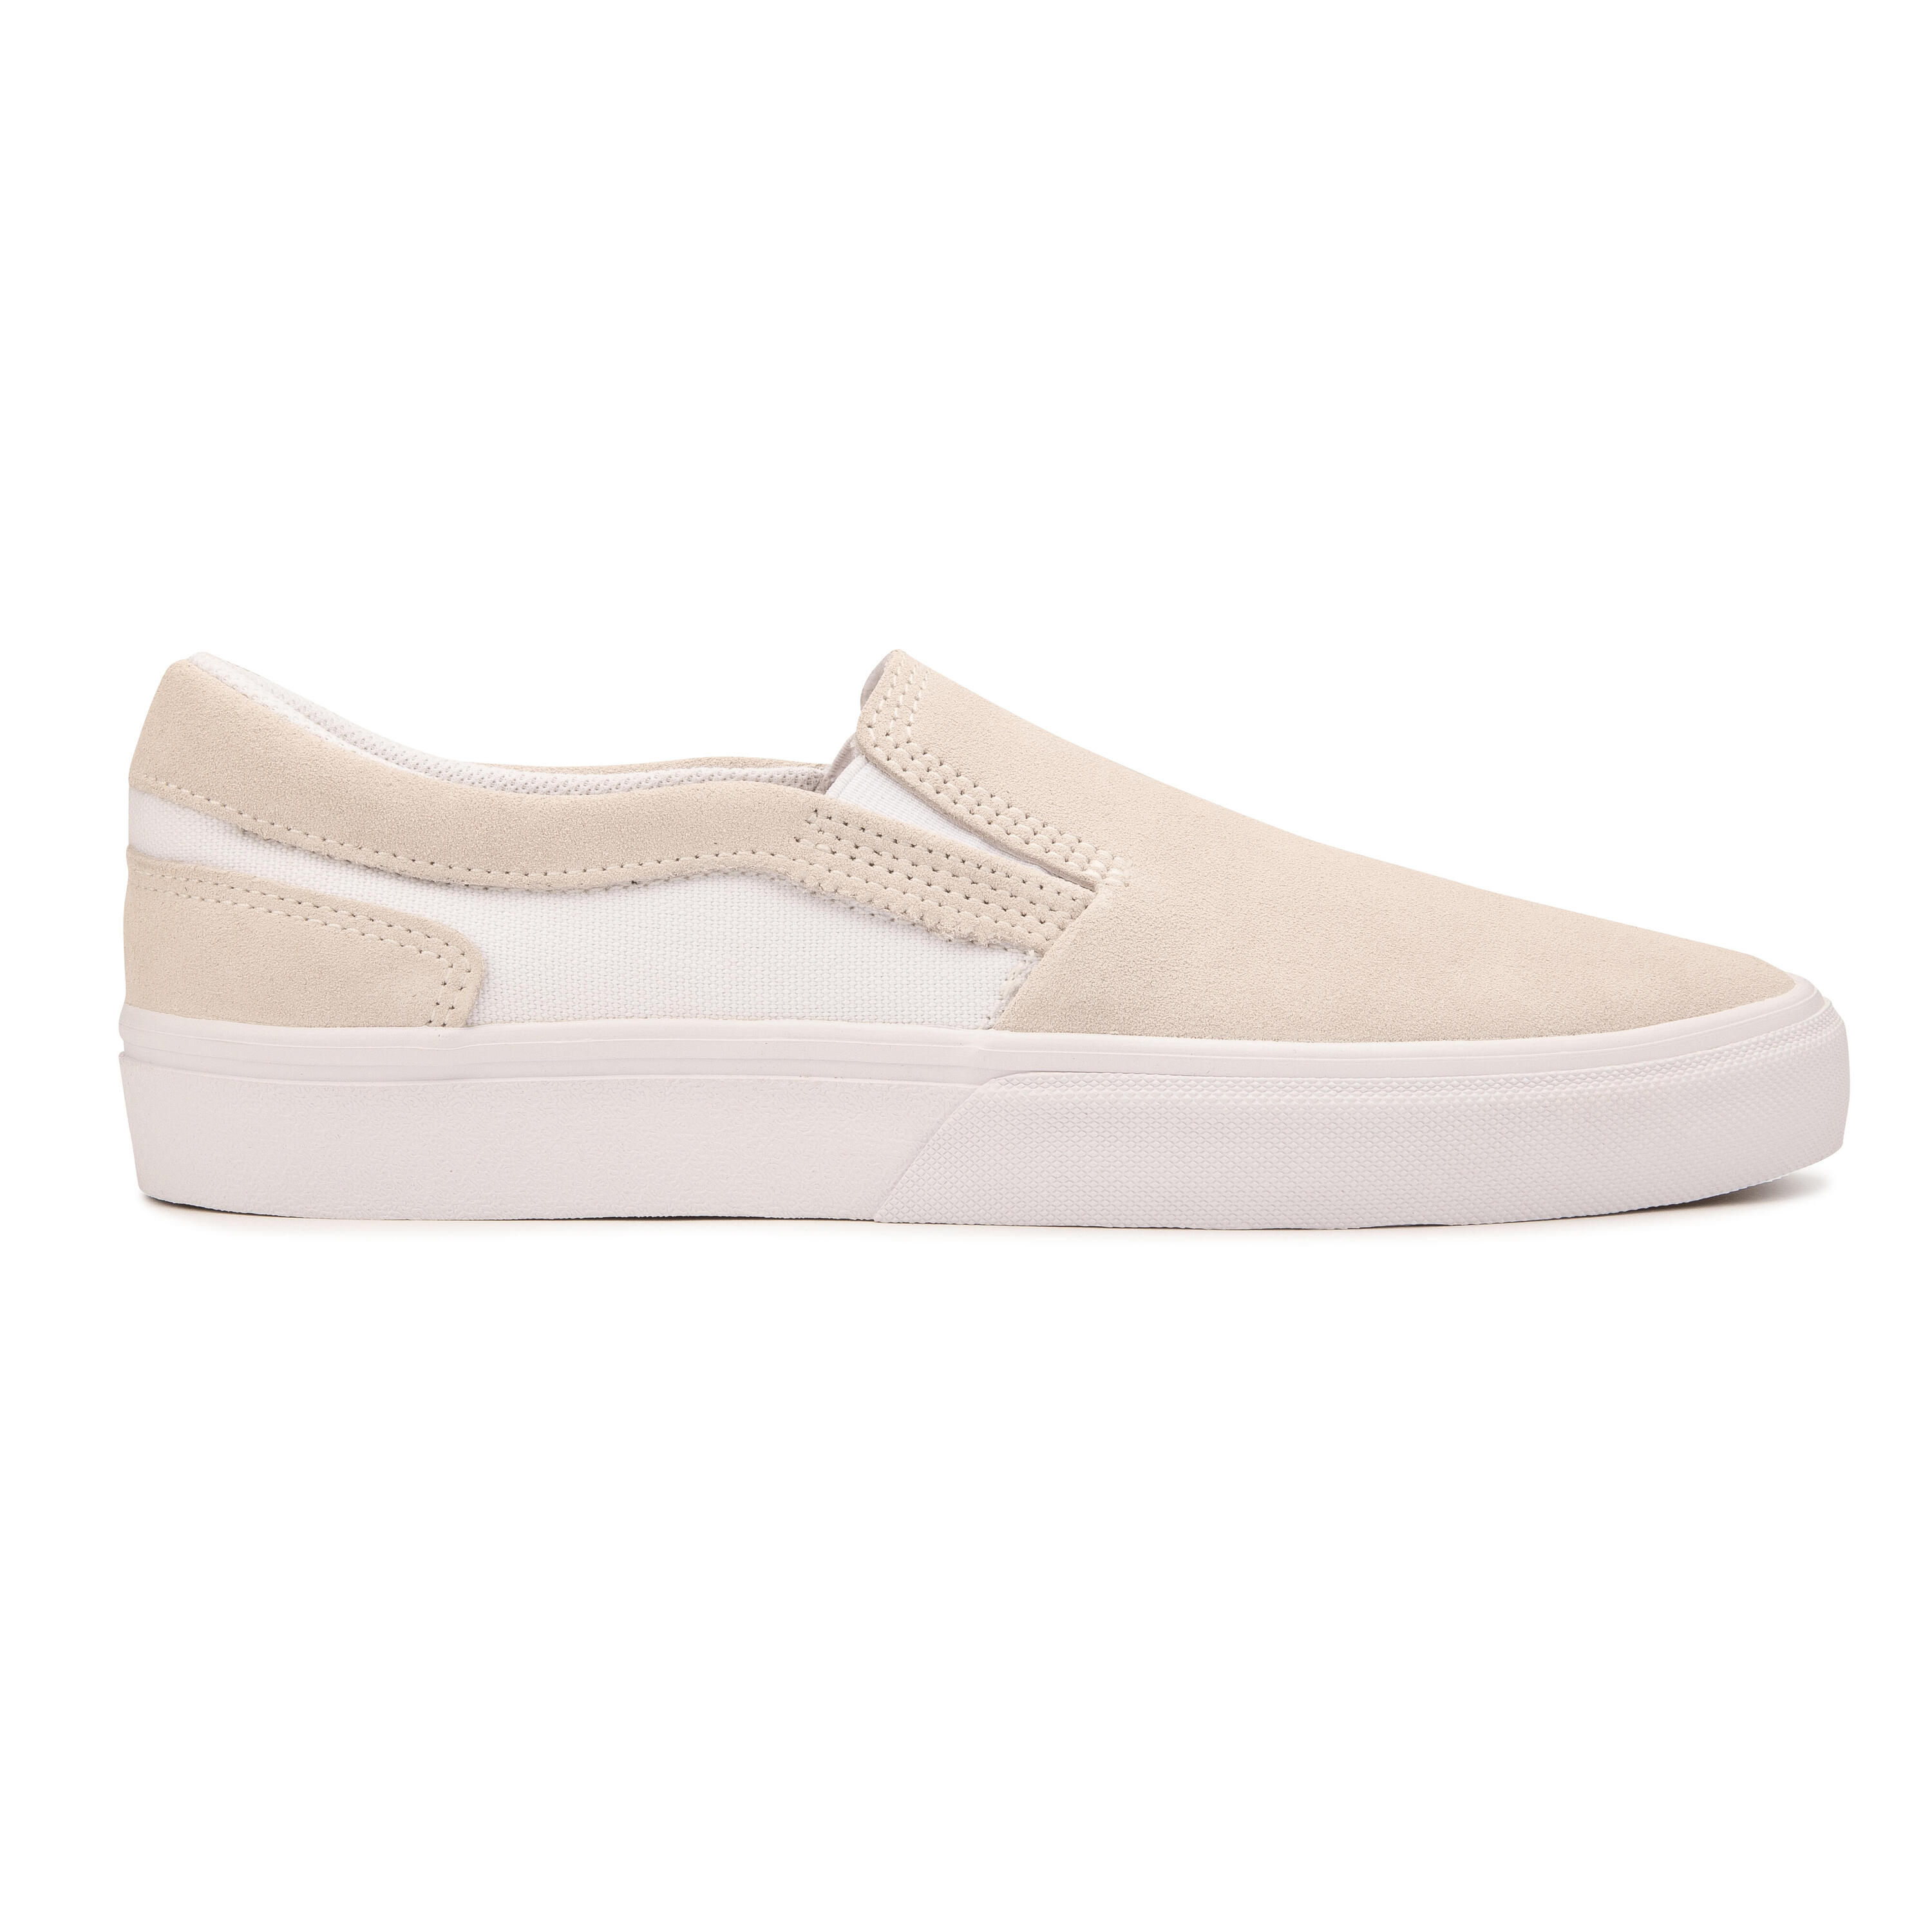 Adult Low-Top Slip-On Skate Shoes Without Laces Vulca 500 - White 5/13